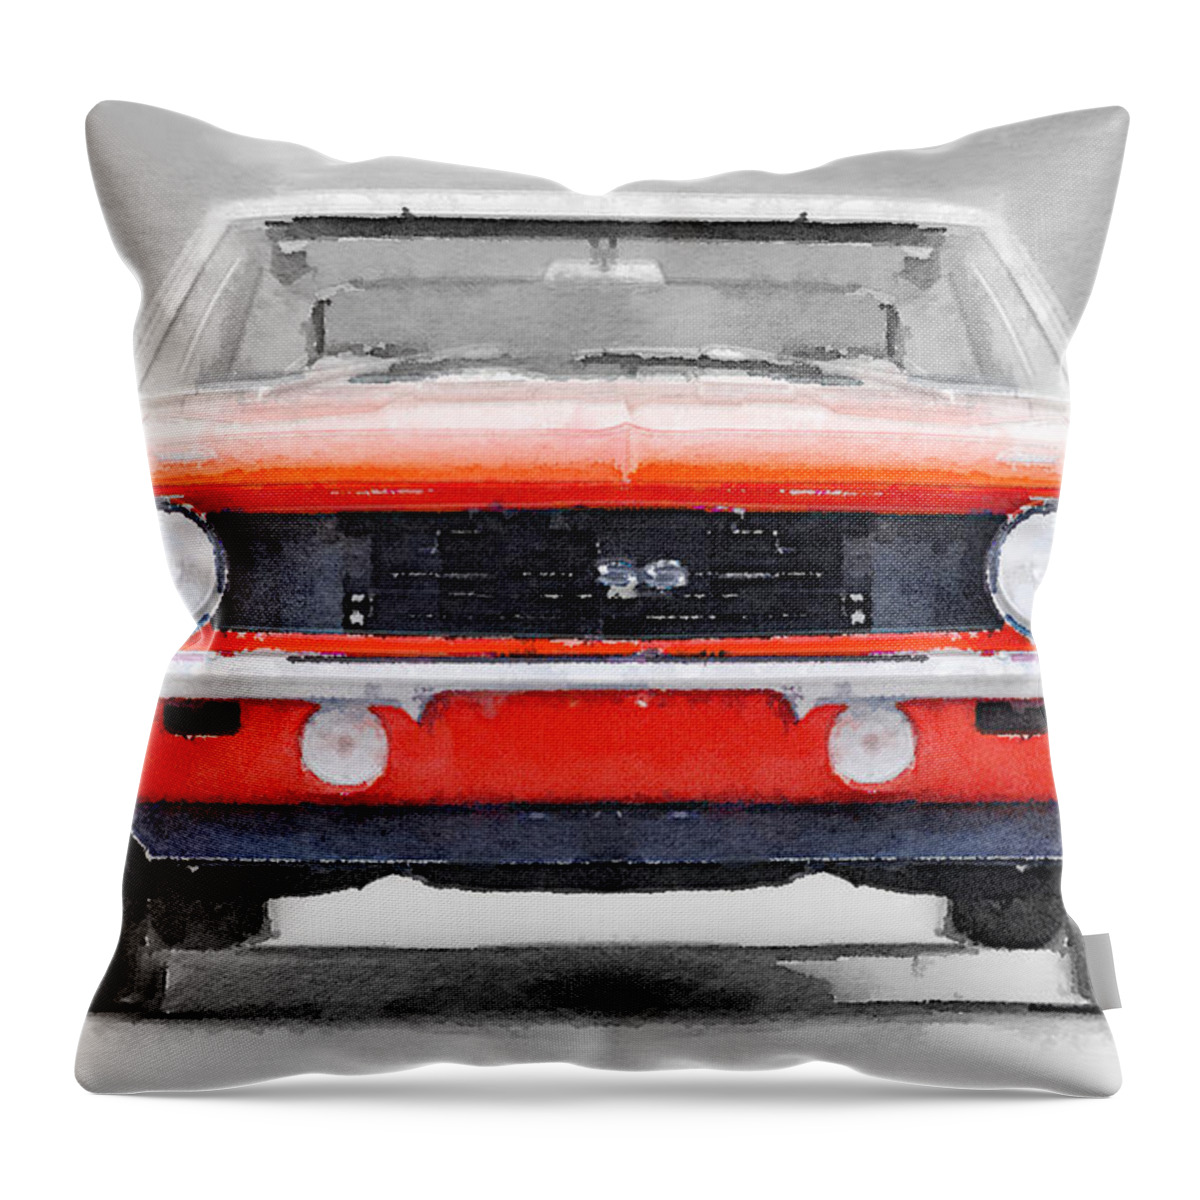 Chevy Camaro Ss Throw Pillow featuring the painting 1968 Chevy Camaro SS Watercolor by Naxart Studio